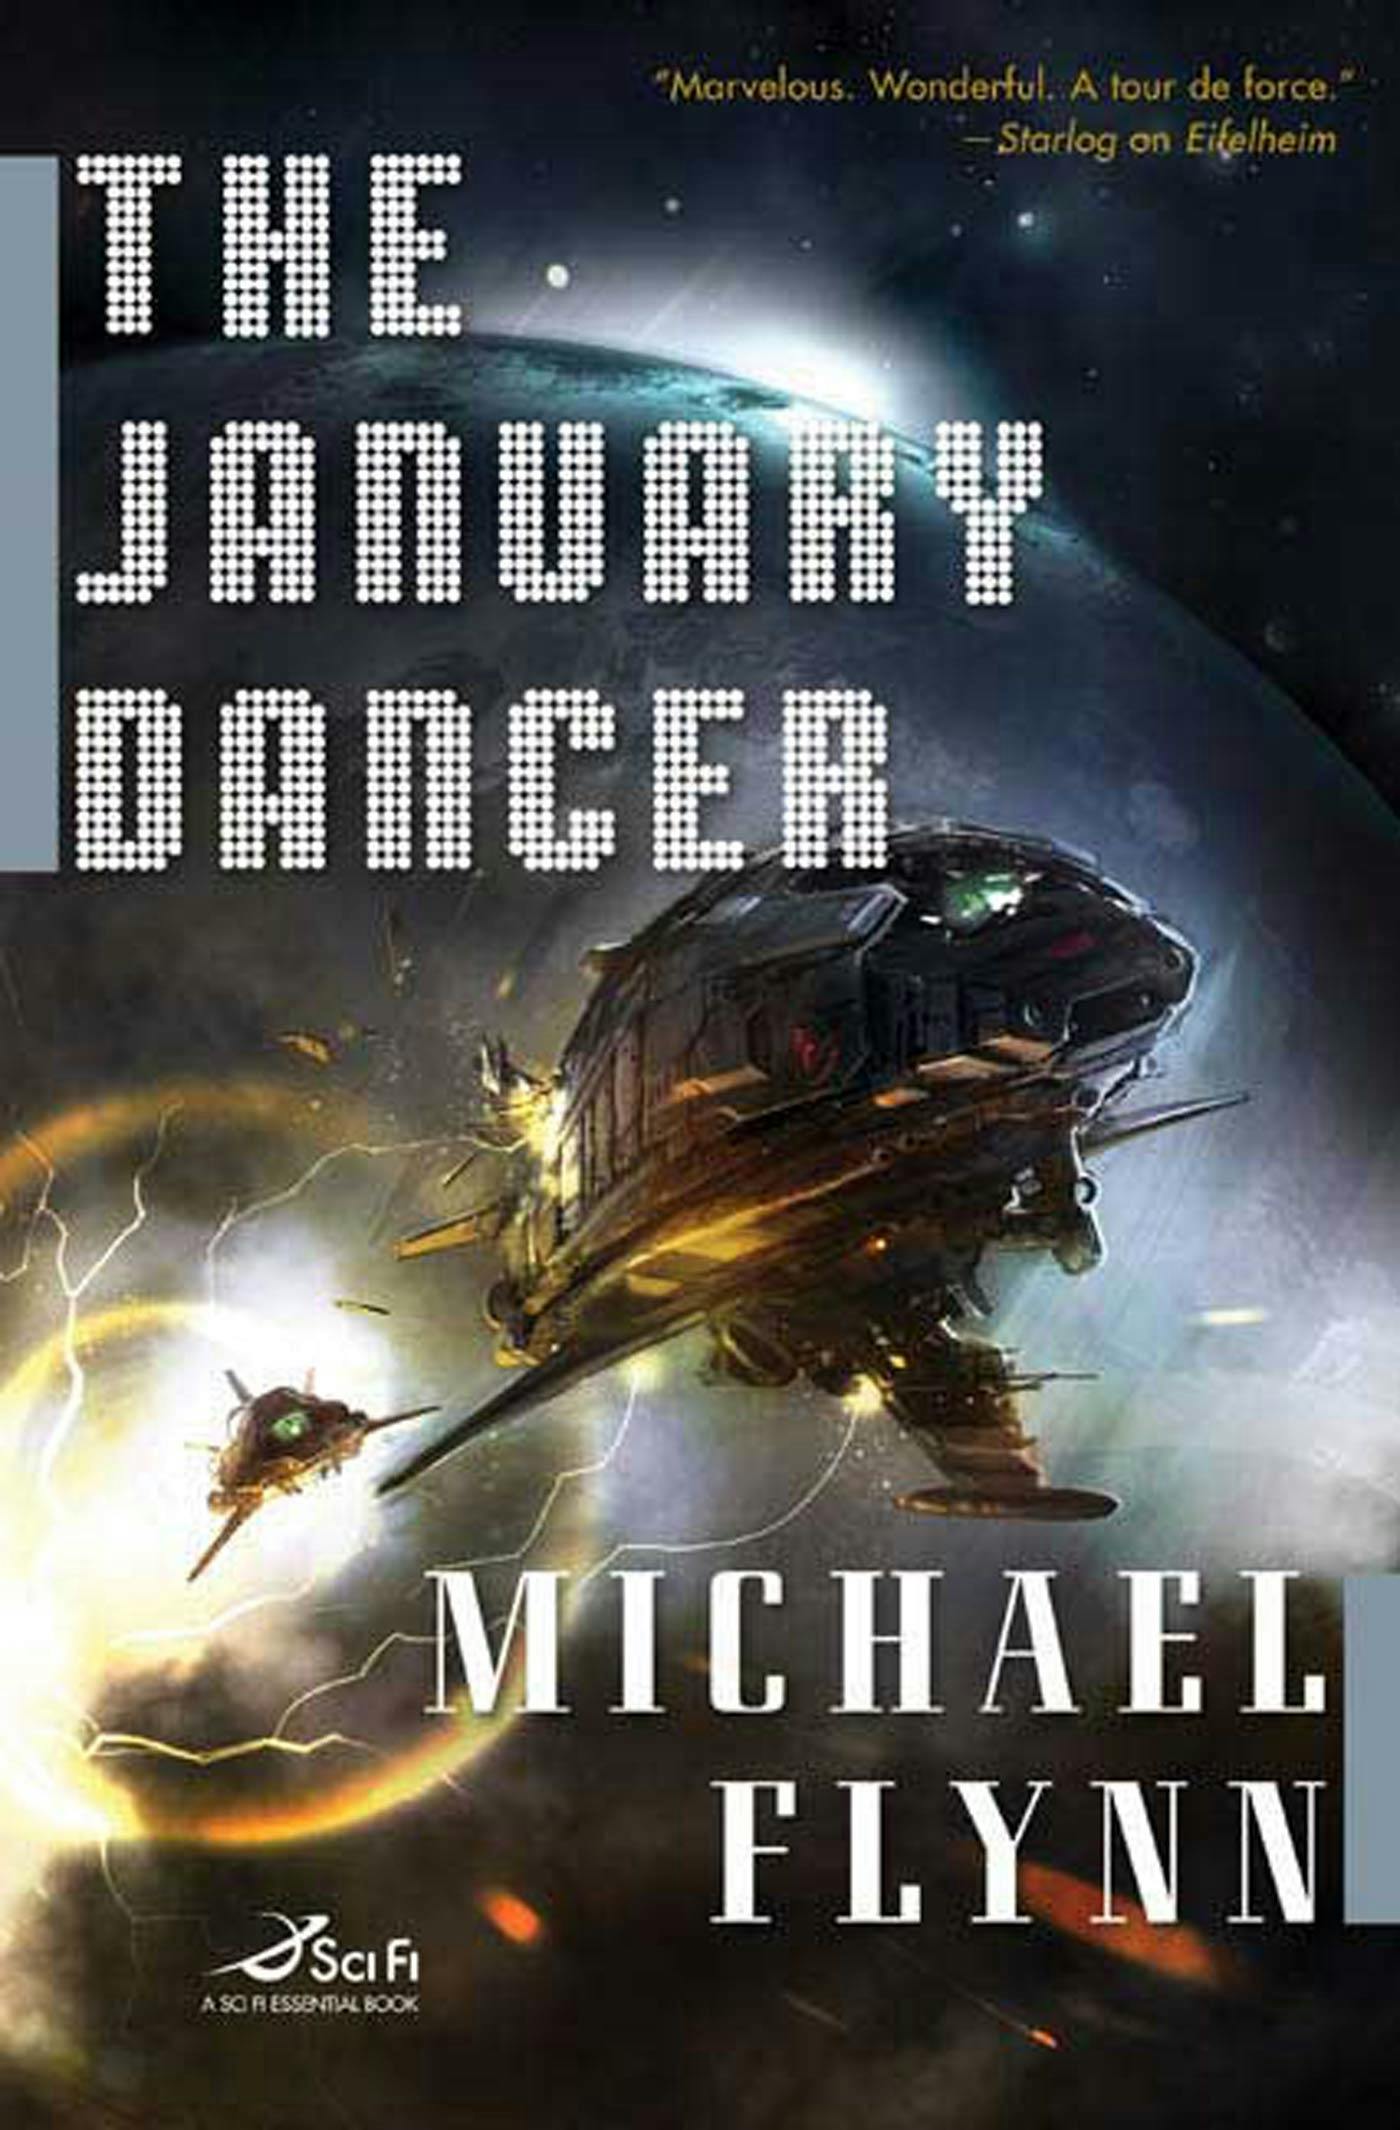 Cover for the book titled as: The January Dancer